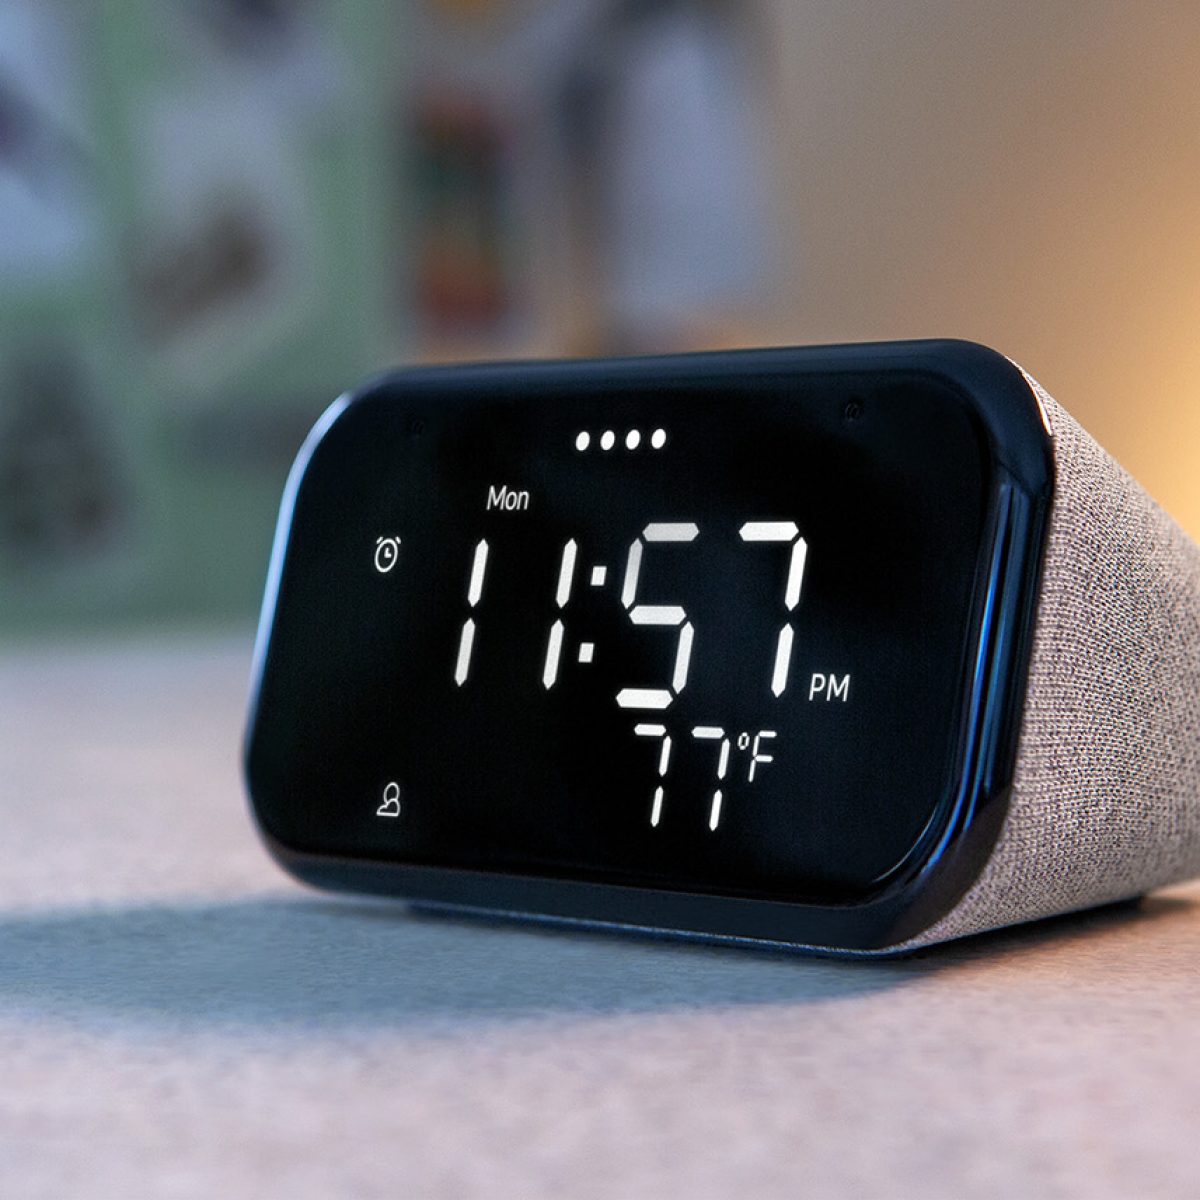 It's Time to Buy a Lenovo Smart Clock